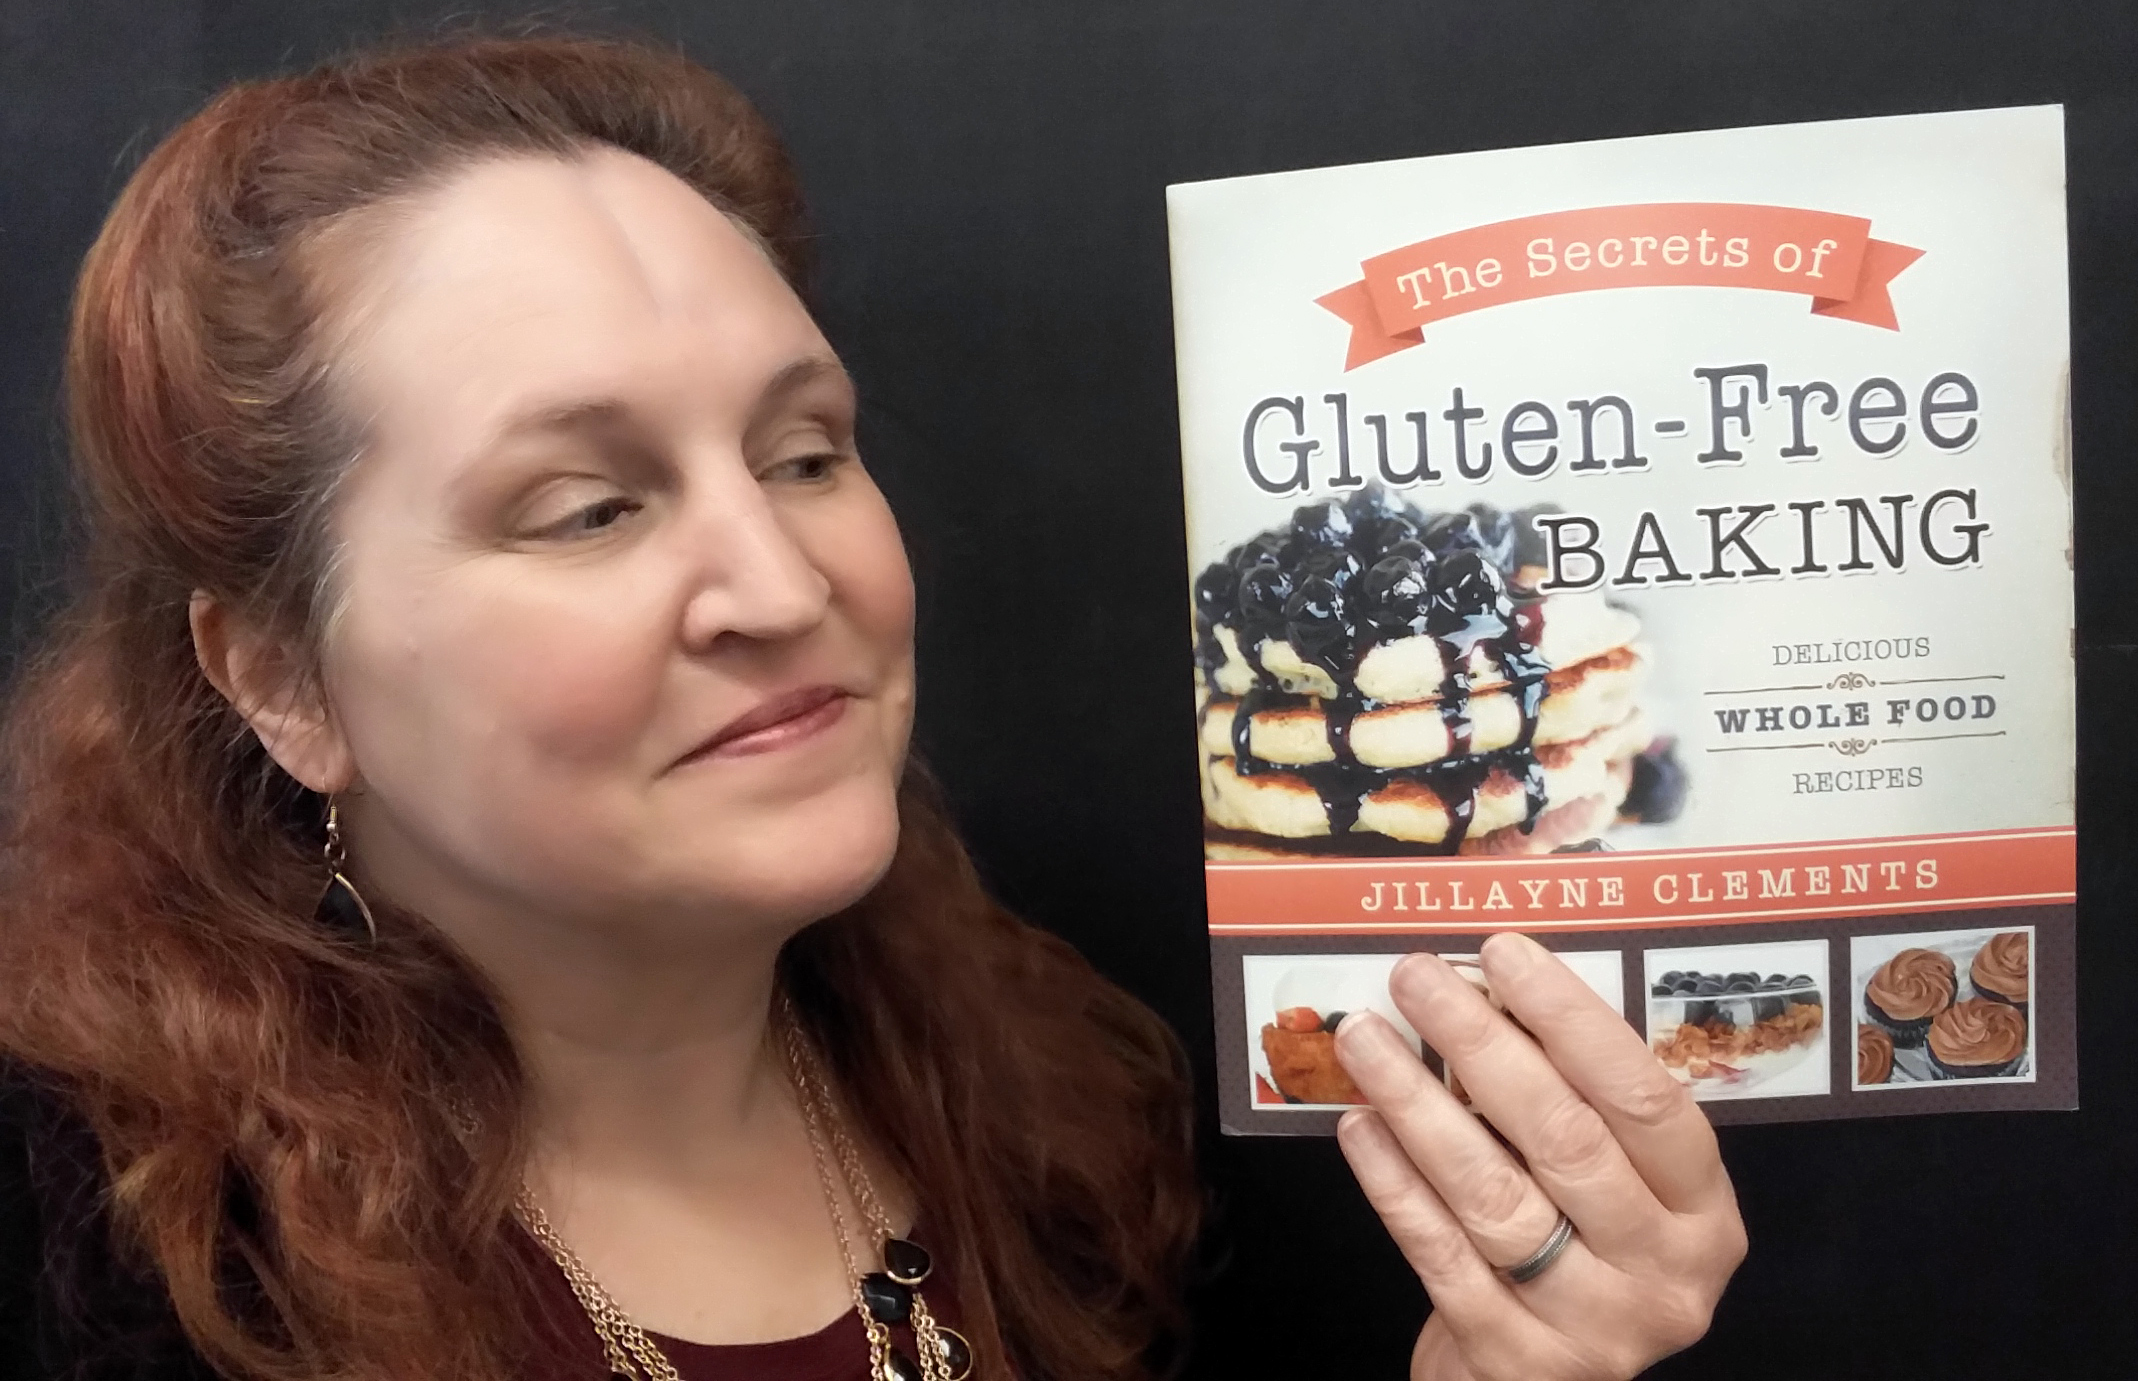 Carma Spence holding a copy of The Secrets of Gluten-Free Baking by Jillayne Clements